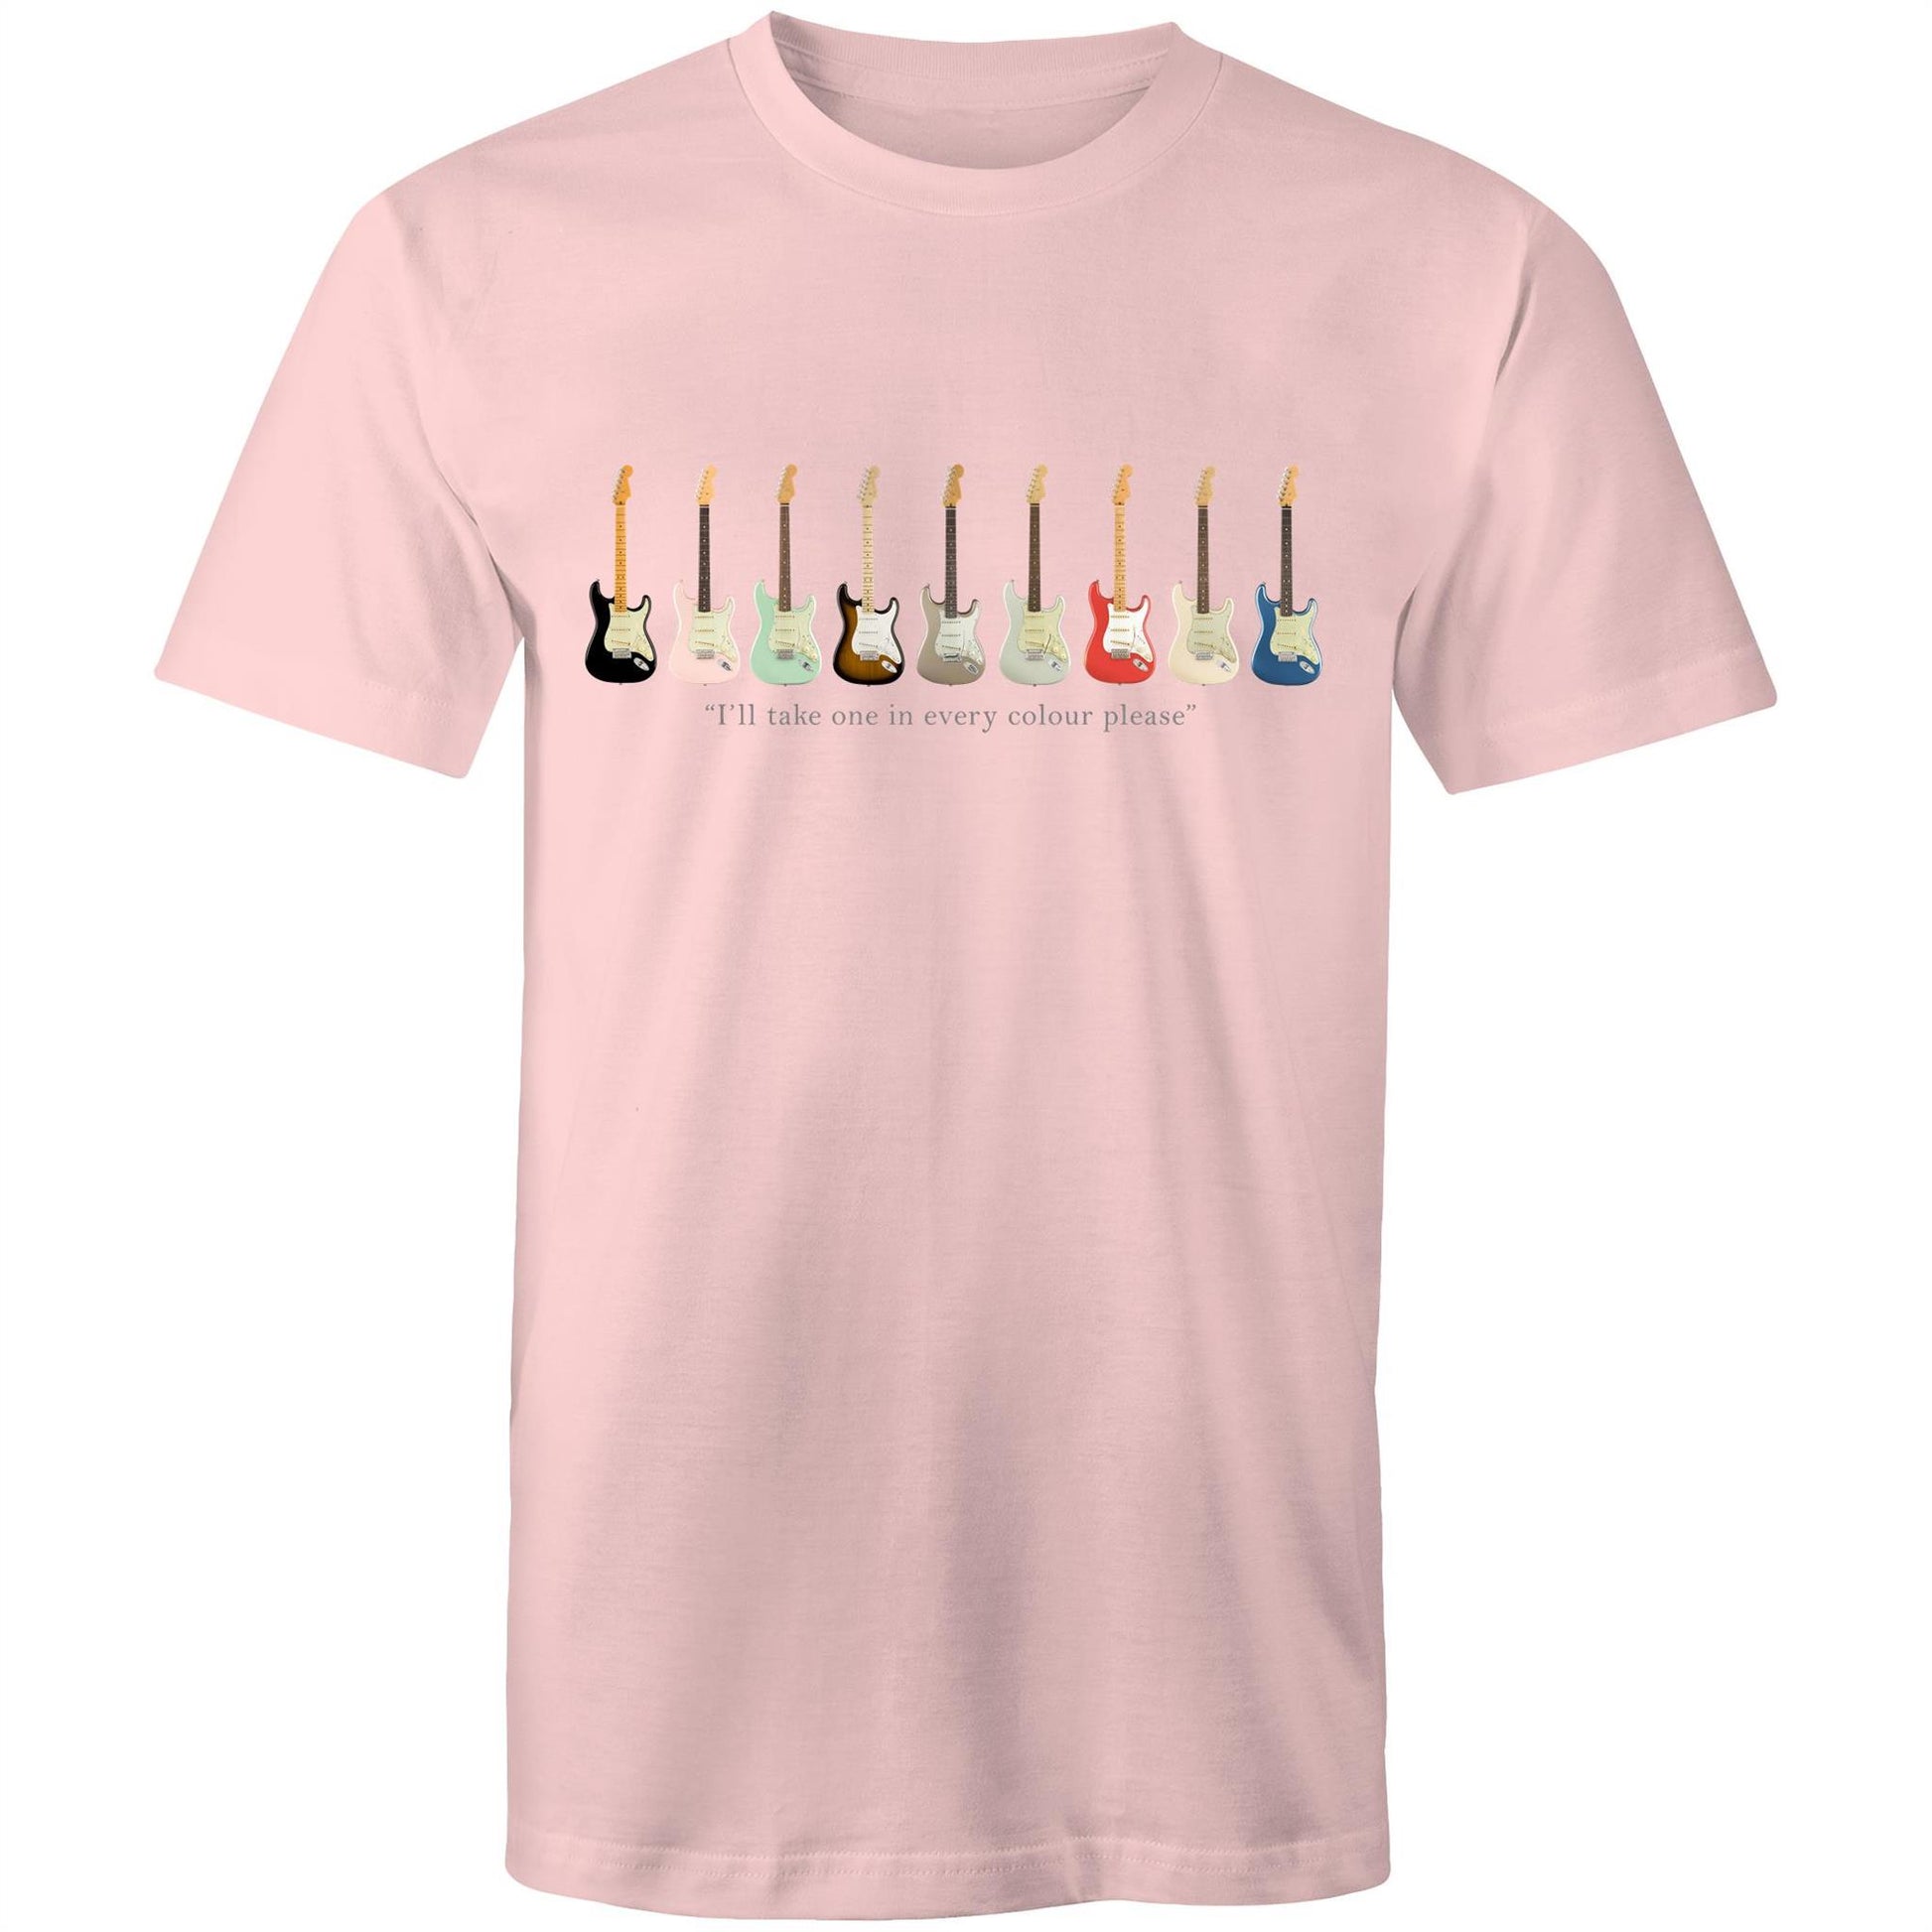 Guitars In Every Colour - Mens T-Shirt Pink Mens T-shirt Music